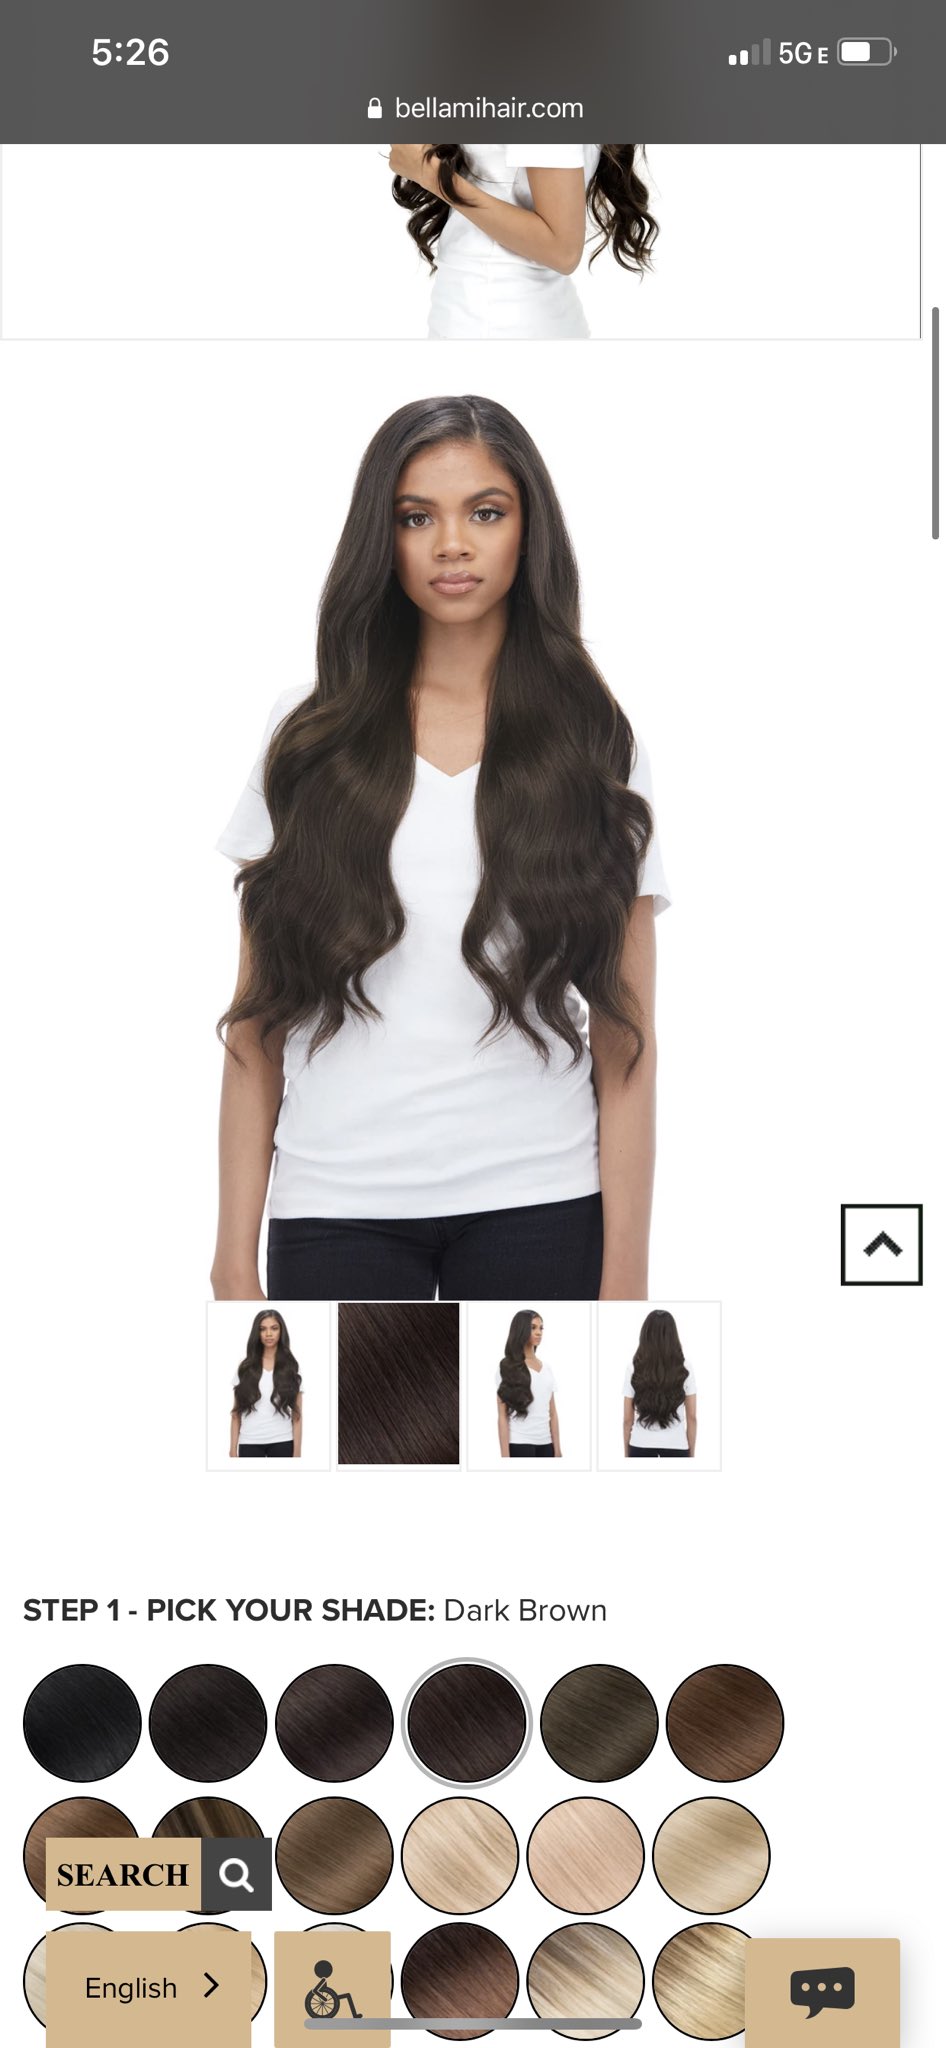 1 pic. For my Christmas gift, I’d like some new 100 percent remy hair extensions in dark brown from @BellamiHair